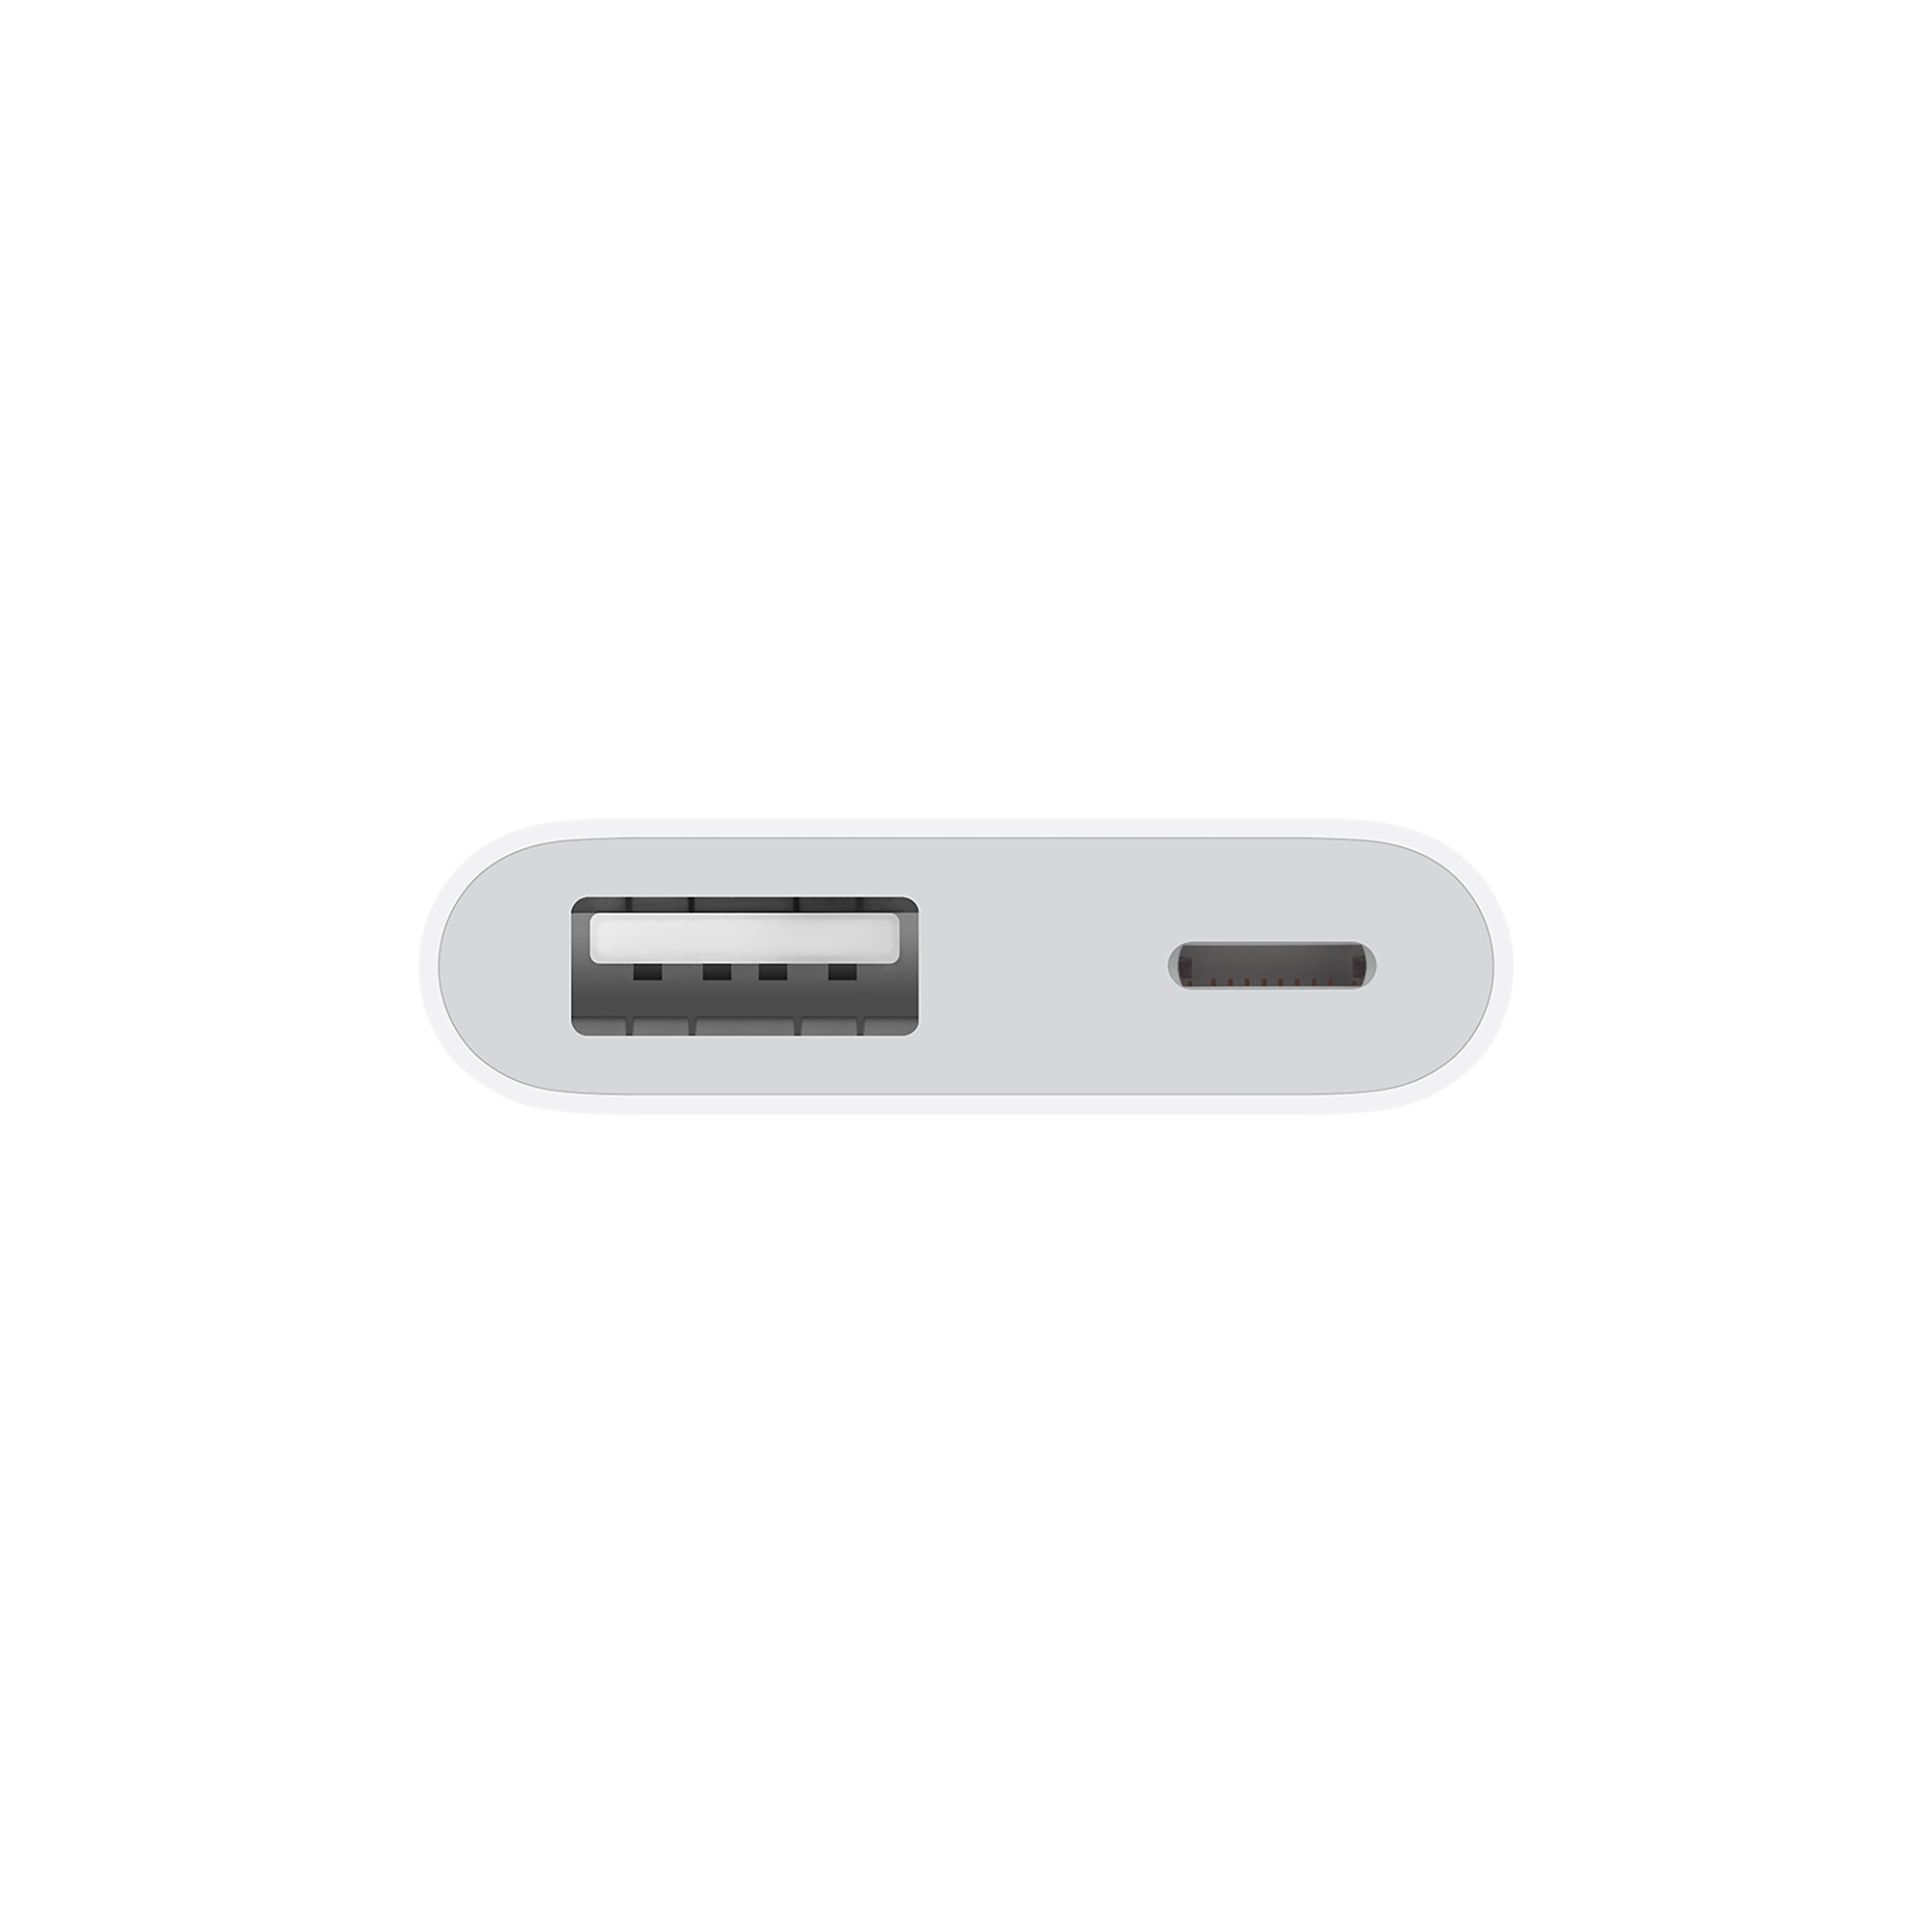 Apple Lightning to USB 3 Camera Adapter A1619 for sale online